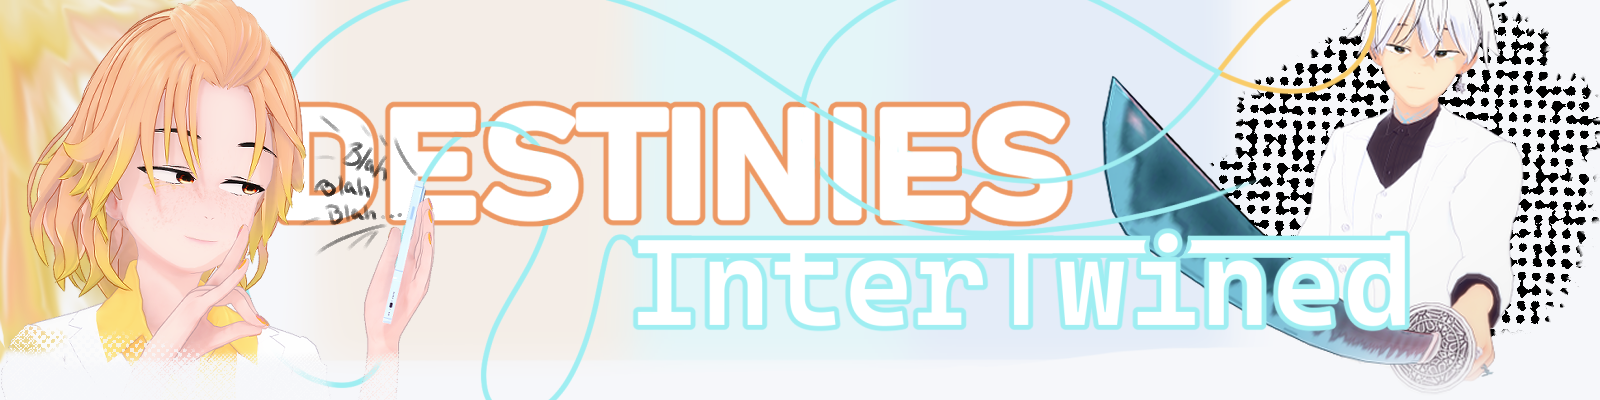 Destinies InterTwined poster